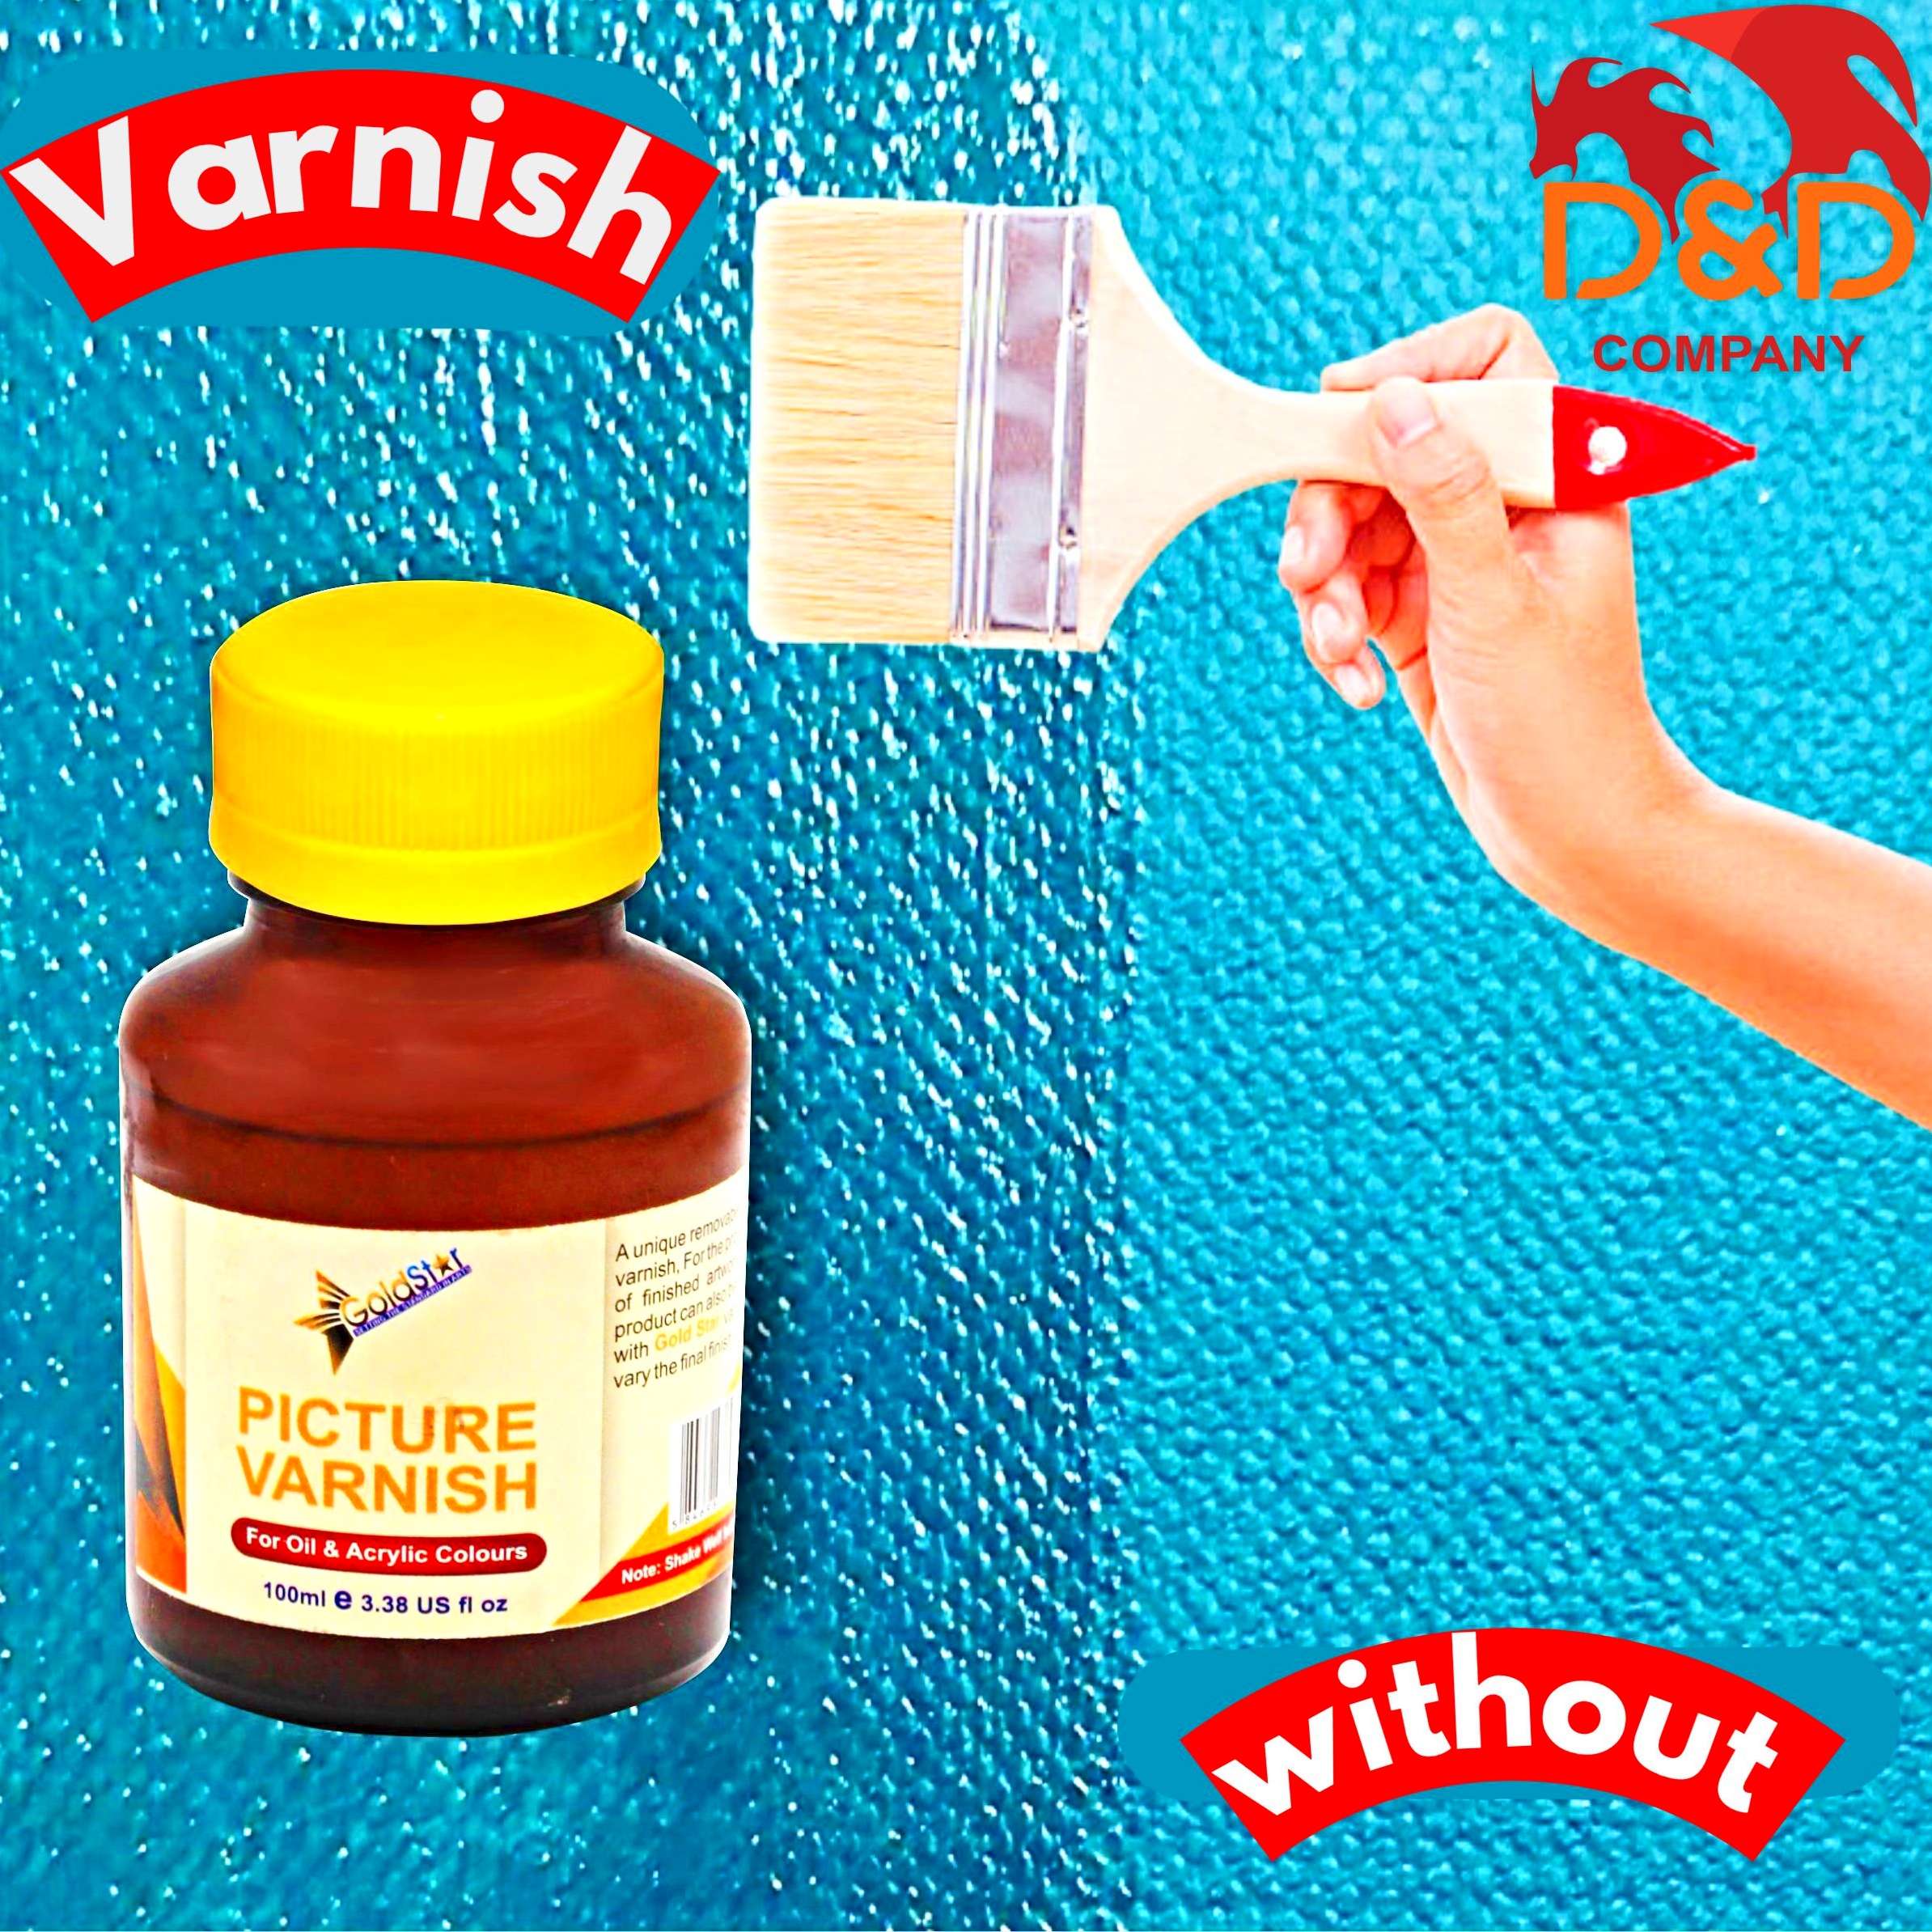 Gloss Varnish for Acrylic Painting, Varnish for Acrylic Paint, Best  Varnish, Gloss Varnish for Painting, Acrylic Varnish, Artist Varnish Paint,  Low odor Varnish for Painting, Art Supplies, Best Mediums & Varnishes